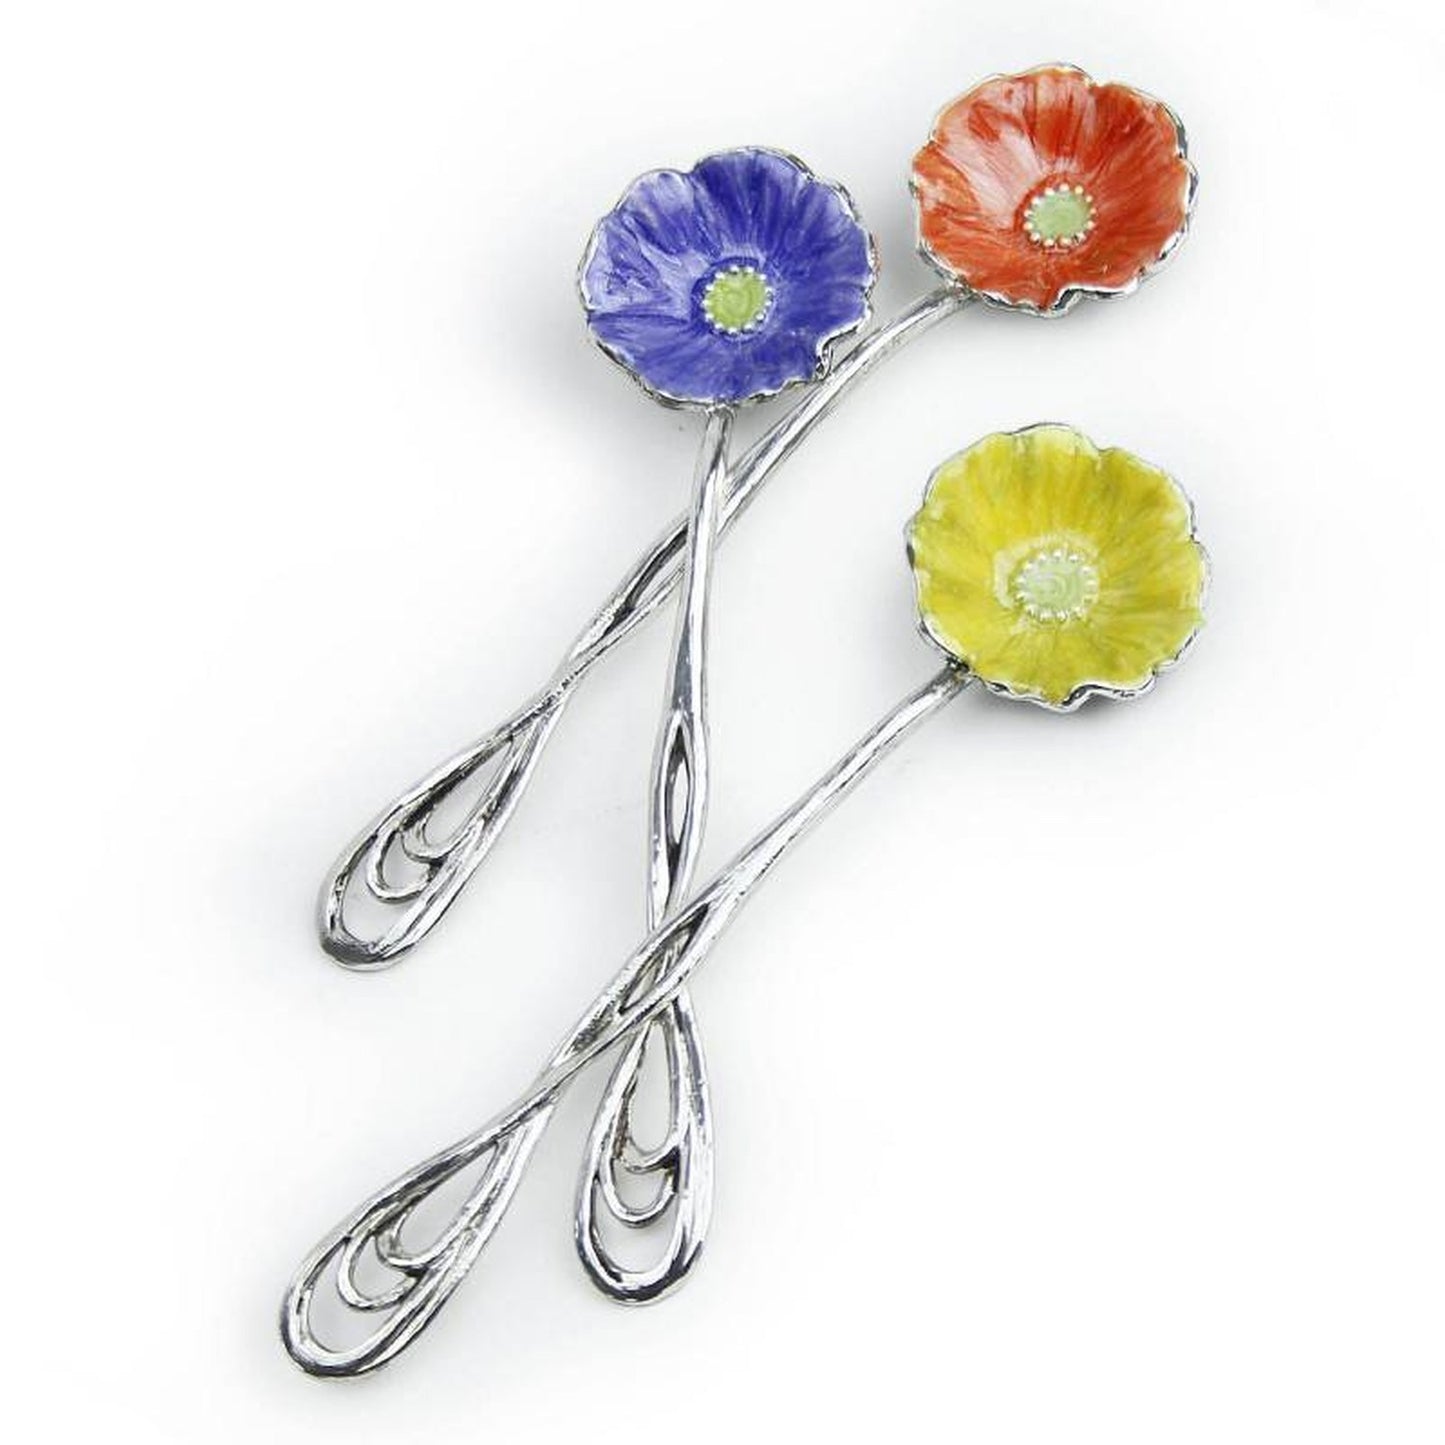 Quest Collection Bright Flowers Spoon Set